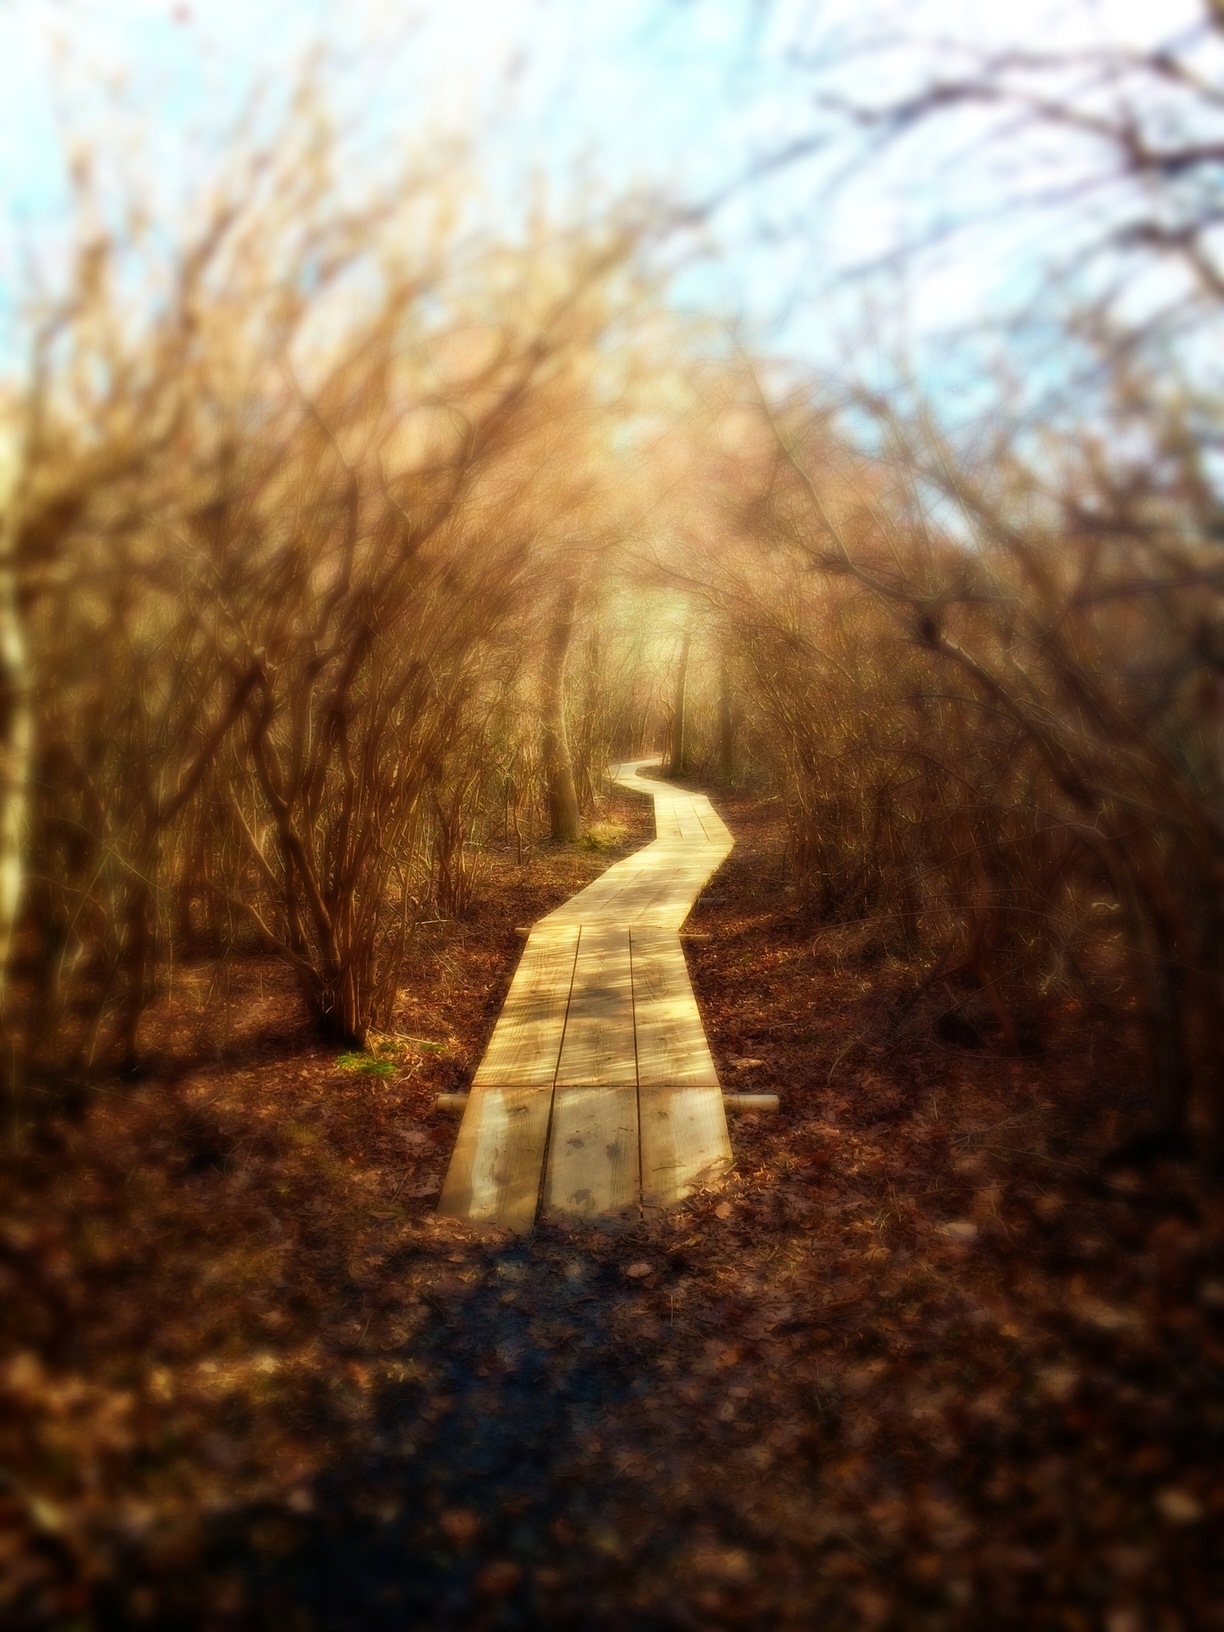 Yarmouth, Massachusetts - A path to nowhere